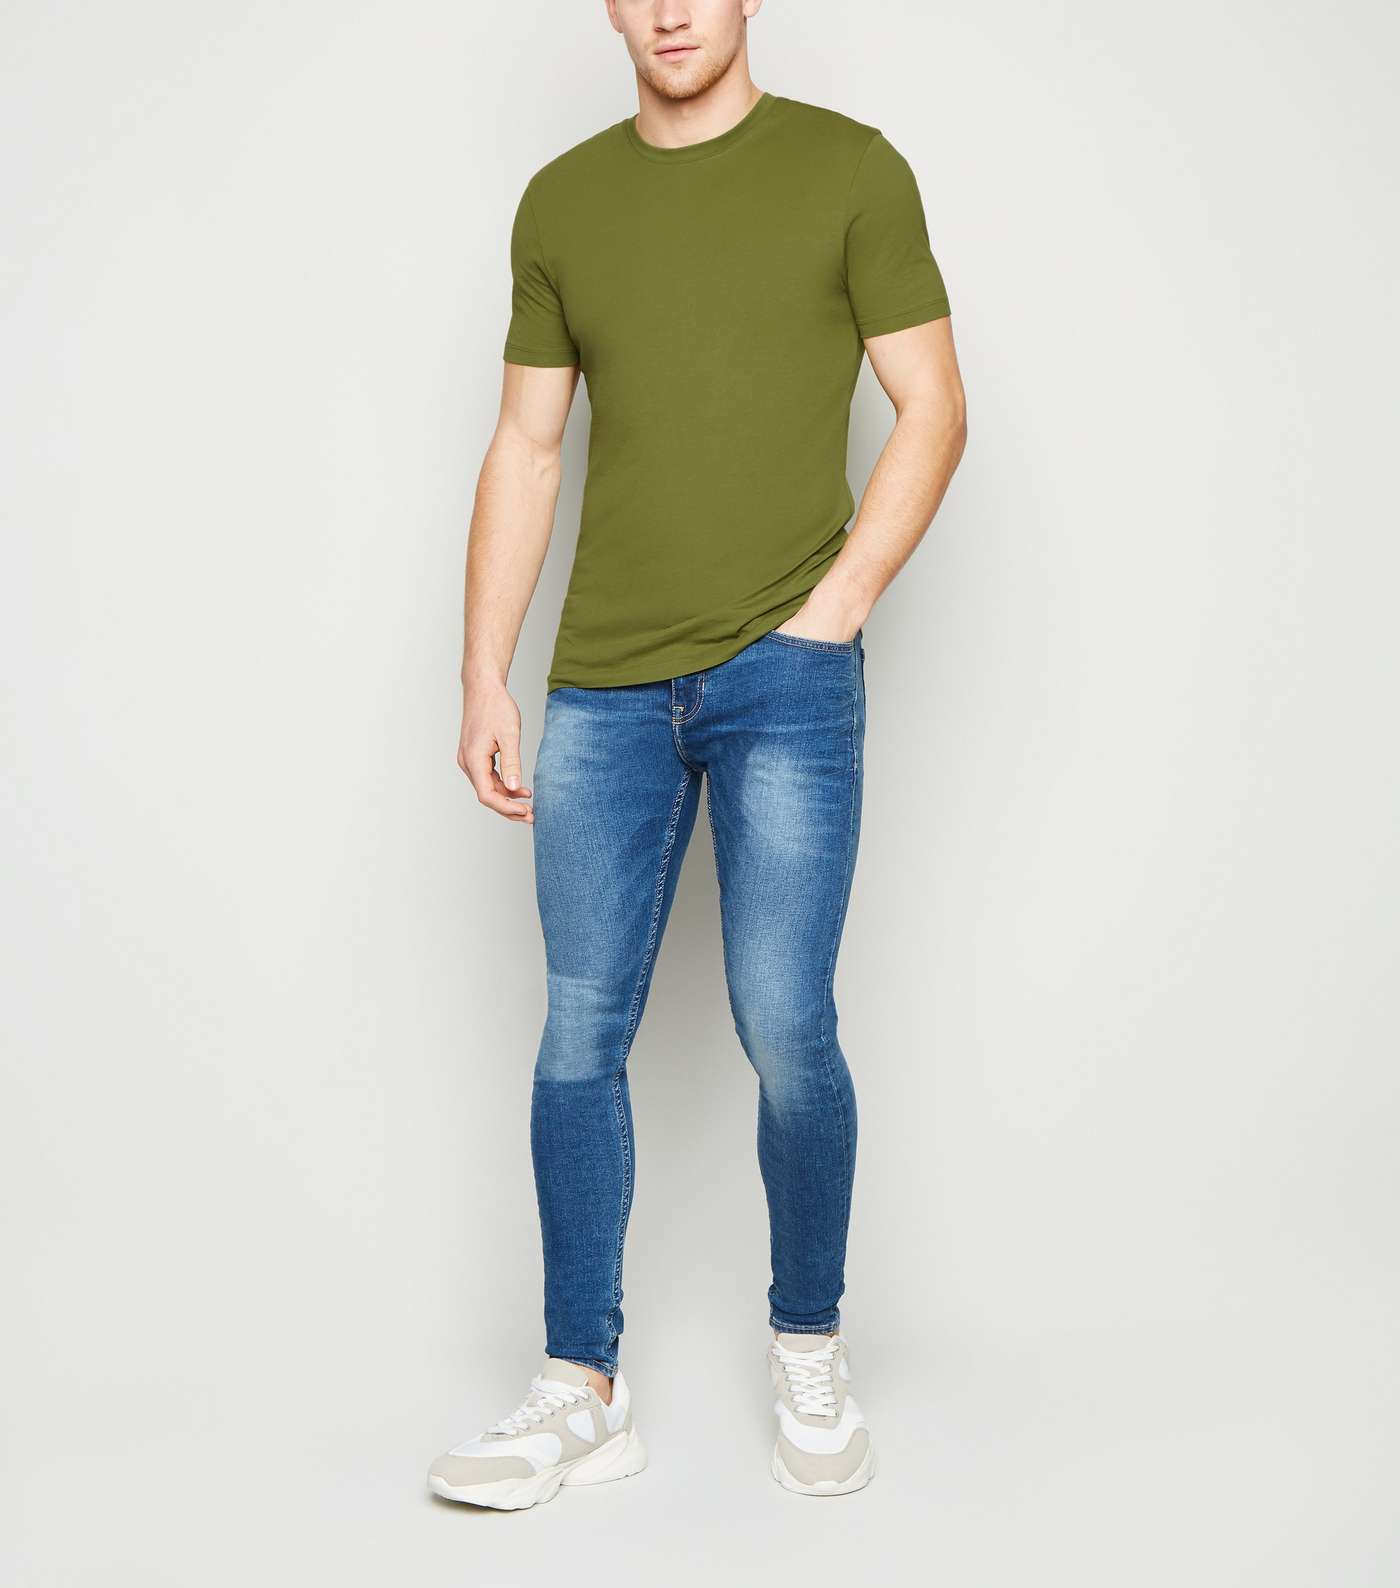 Green Muscle Fit Cotton T-Shirt Image 2